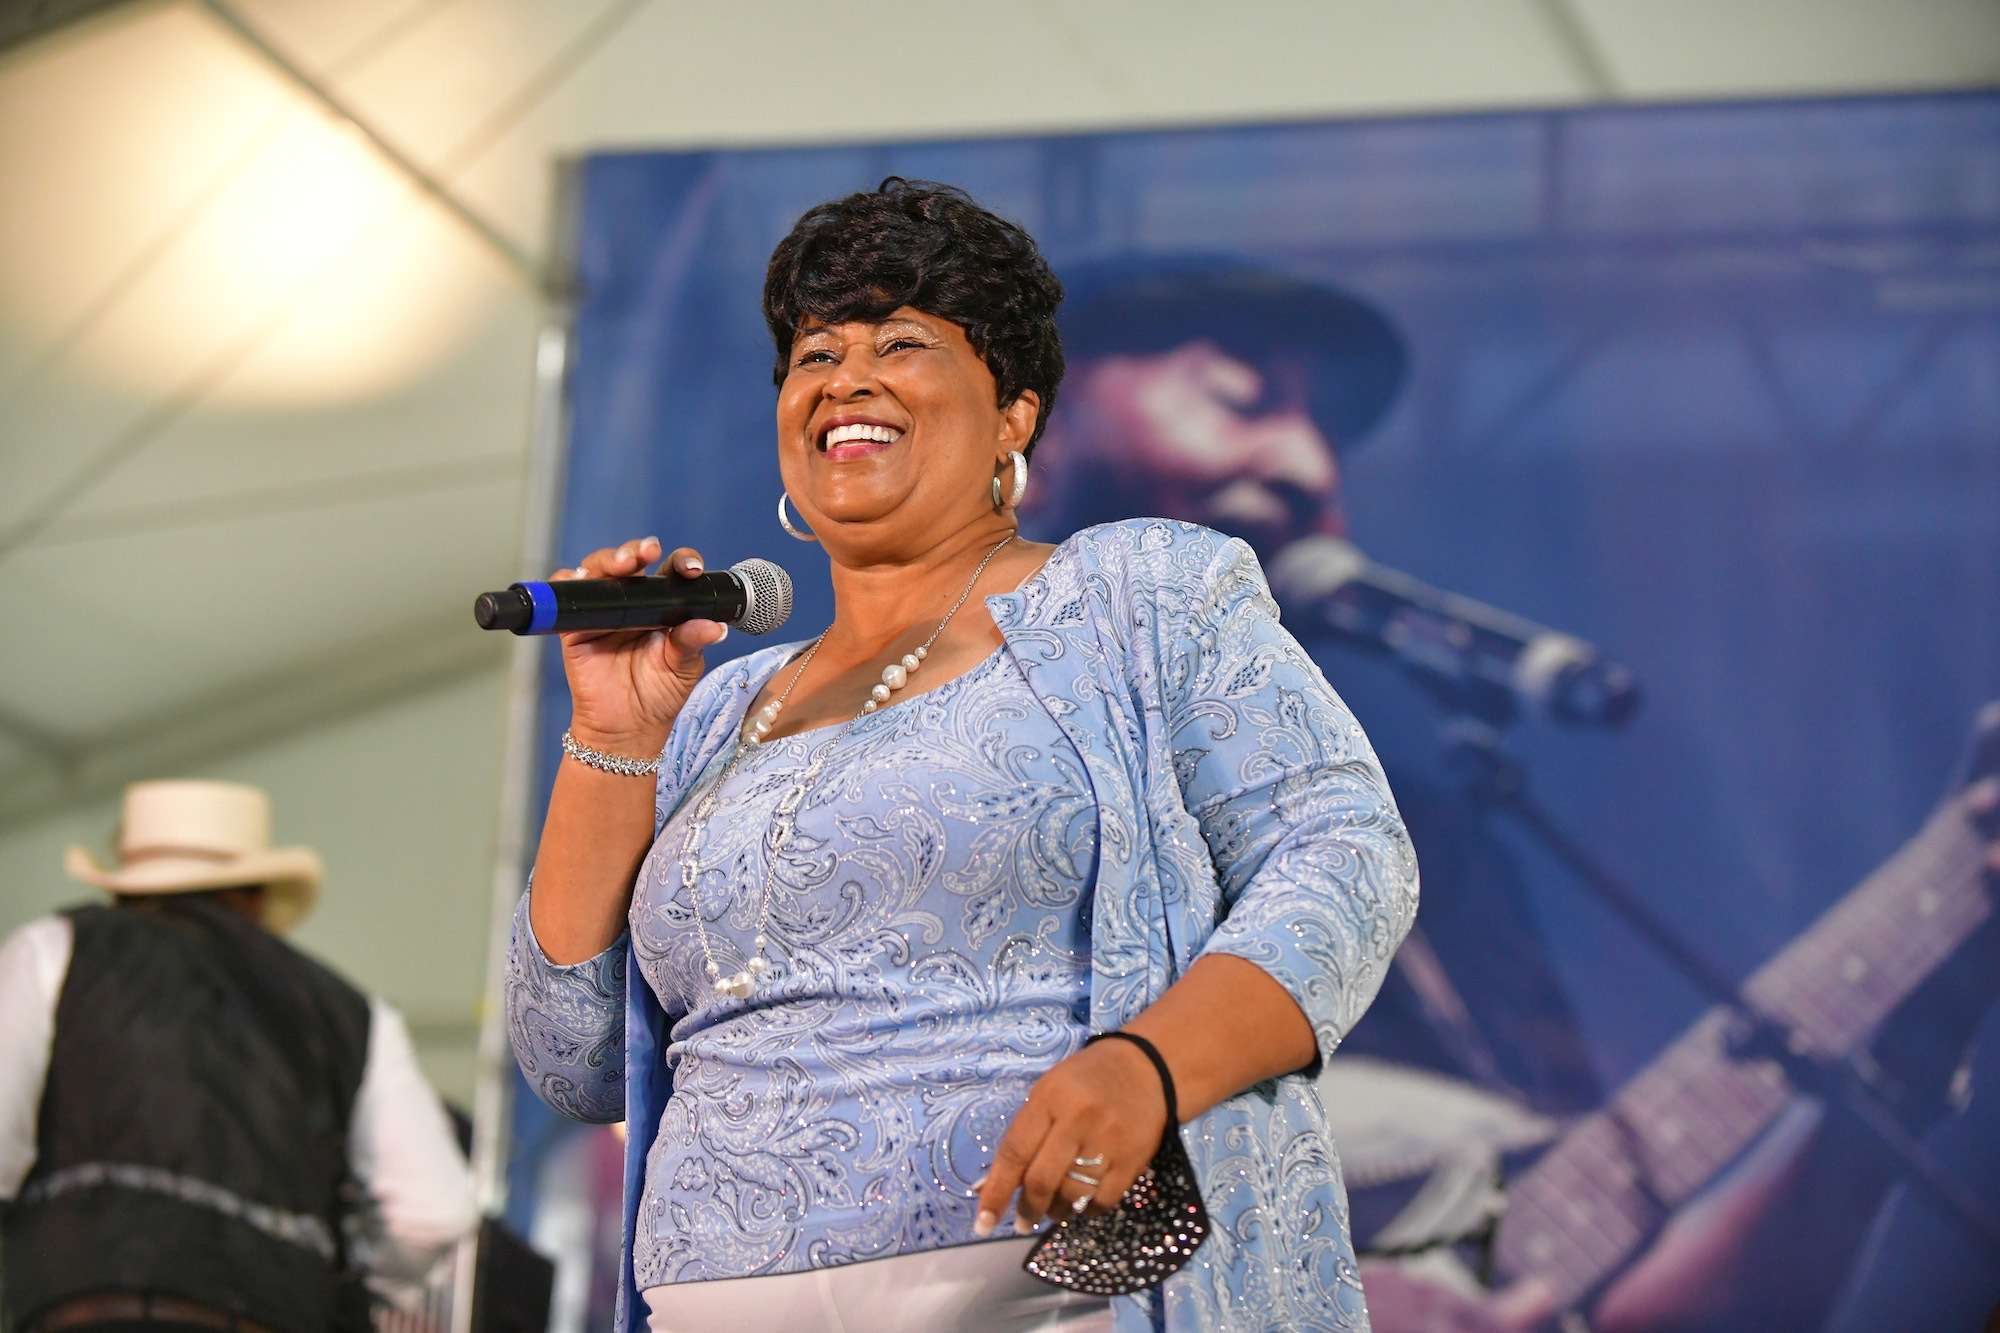 Ms Jody Live At Chicago Blues Fest [GALLERY] 8